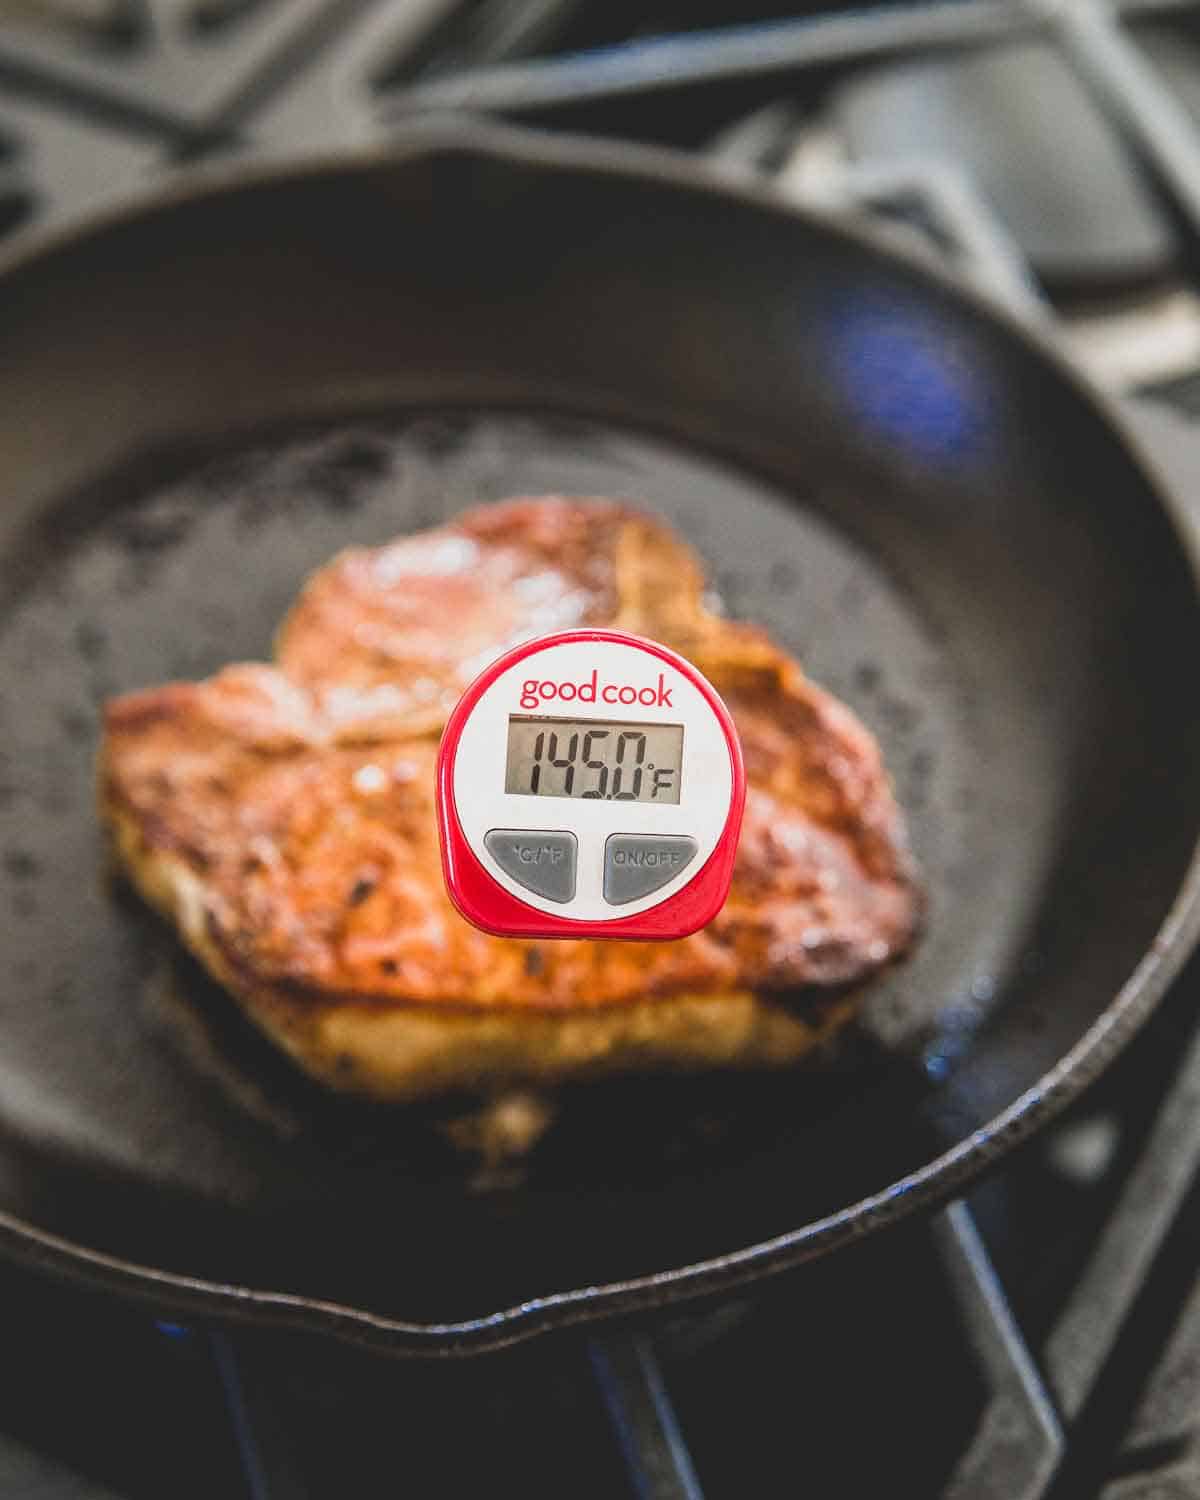 Cook skillet pork chops until an instant read thermometer hits 145 degrees Fahrenheit then let rest for 3 minutes for medium rare. 